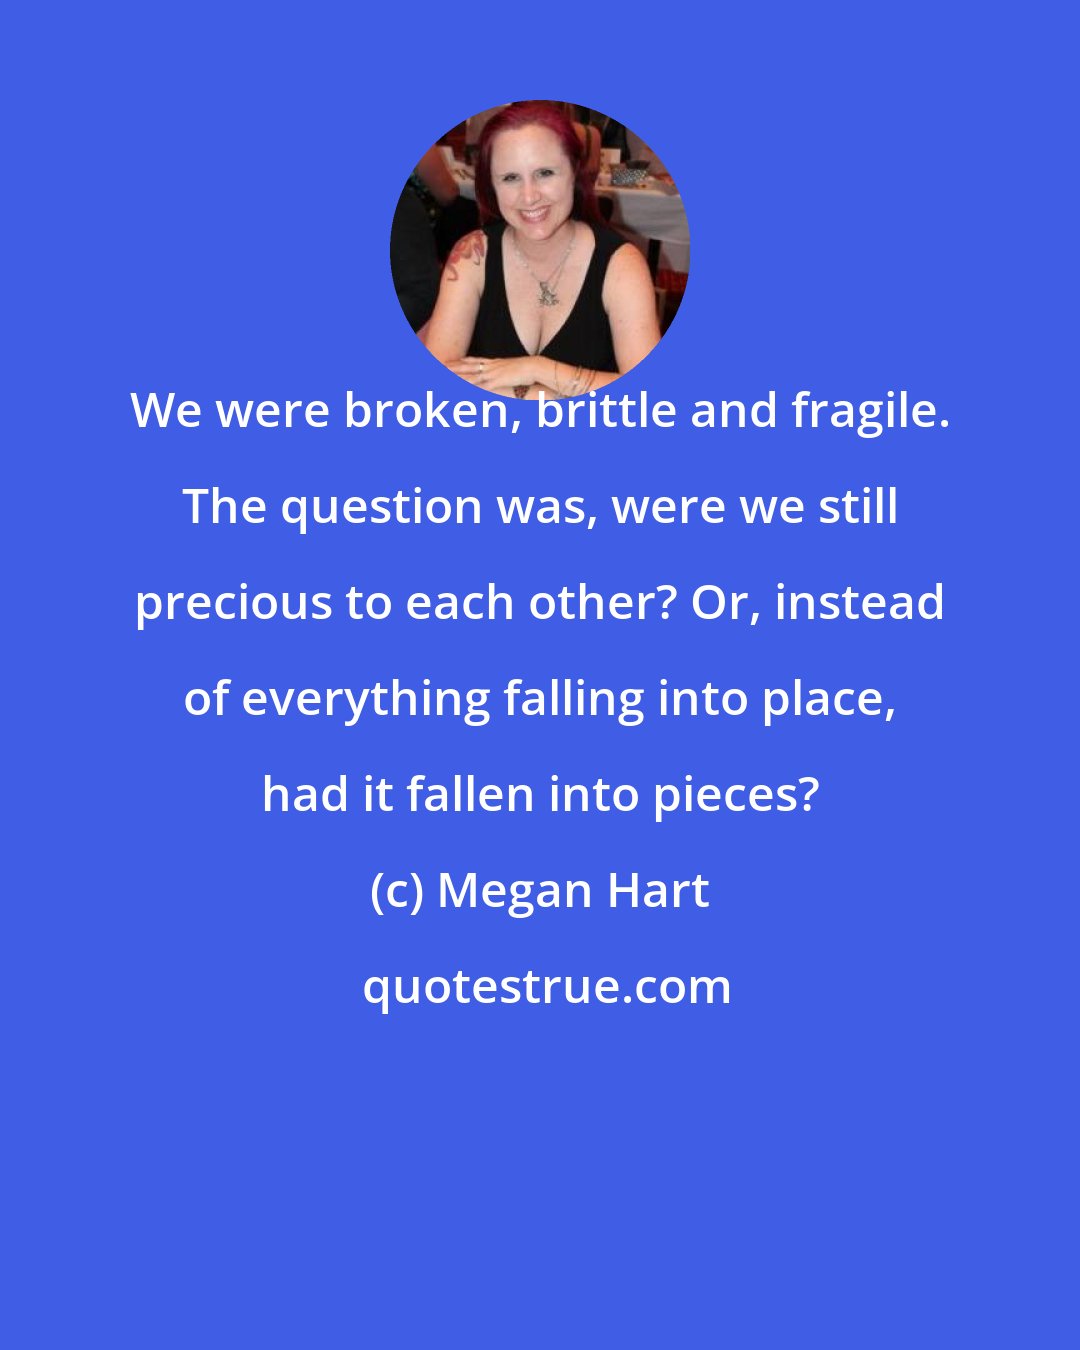 Megan Hart: We were broken, brittle and fragile. The question was, were we still precious to each other? Or, instead of everything falling into place, had it fallen into pieces?